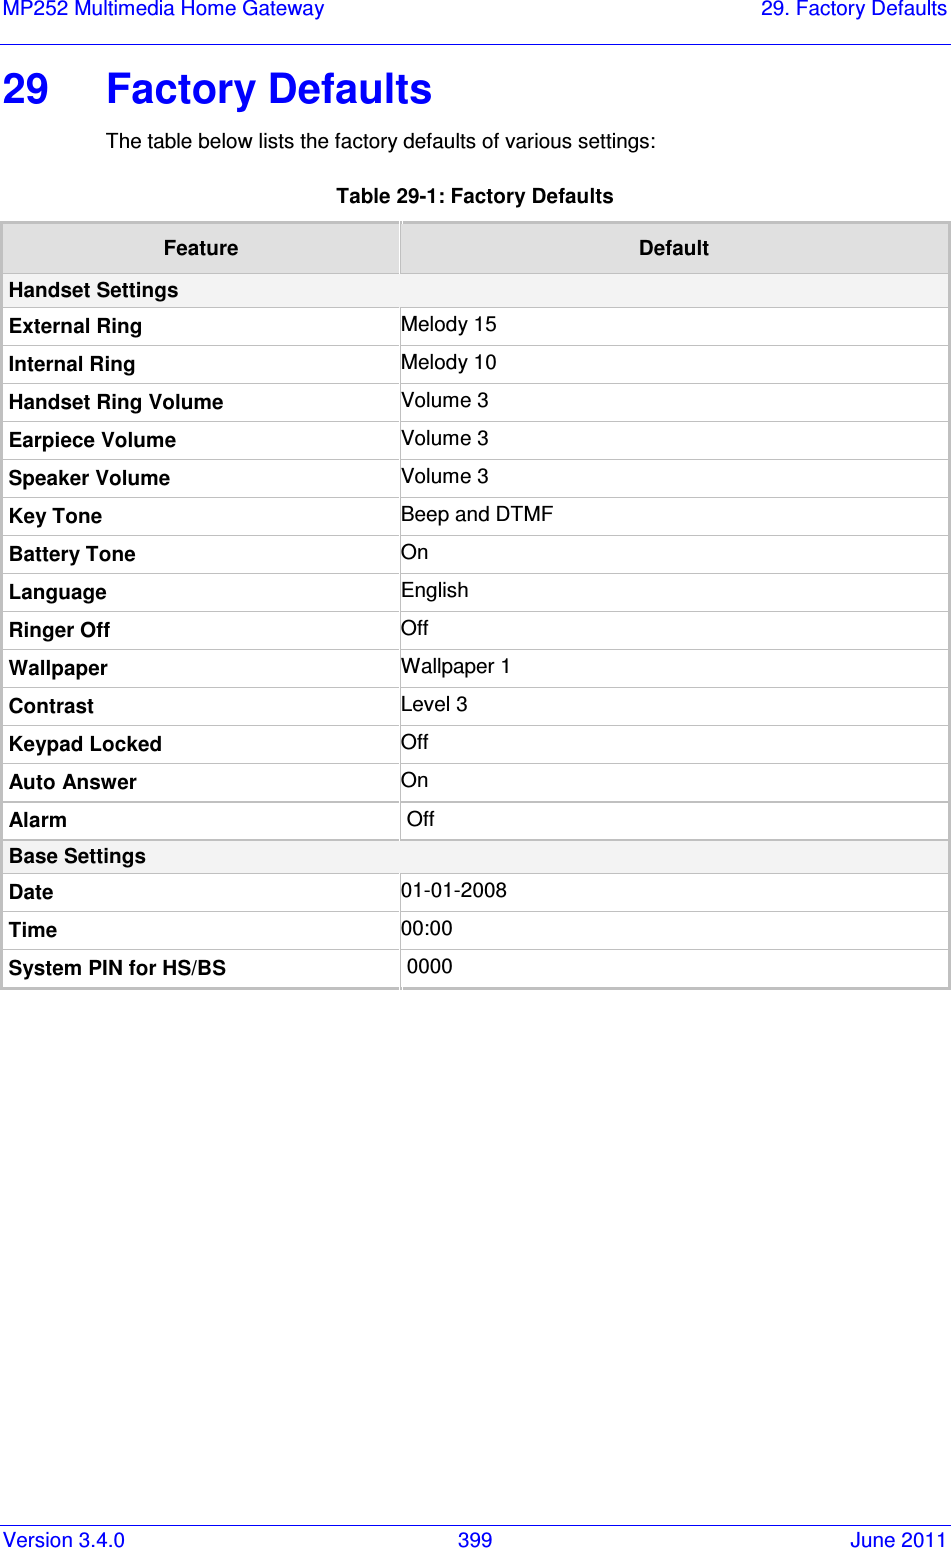 Version 3.4.0  399  June 2011 MP252 Multimedia Home Gateway  29. Factory Defaults  29  Factory Defaults The table below lists the factory defaults of various settings: Table 29-1: Factory Defaults Feature  Default Handset Settings External Ring  Melody 15 Internal Ring  Melody 10 Handset Ring Volume Volume 3 Earpiece Volume Volume 3 Speaker Volume Volume 3 Key Tone  Beep and DTMF Battery Tone  On Language  English Ringer Off  Off Wallpaper  Wallpaper 1 Contrast  Level 3 Keypad Locked  Off Auto Answer  On Alarm  Off Base Settings Date  01-01-2008 Time  00:00 System PIN for HS/BS  0000  